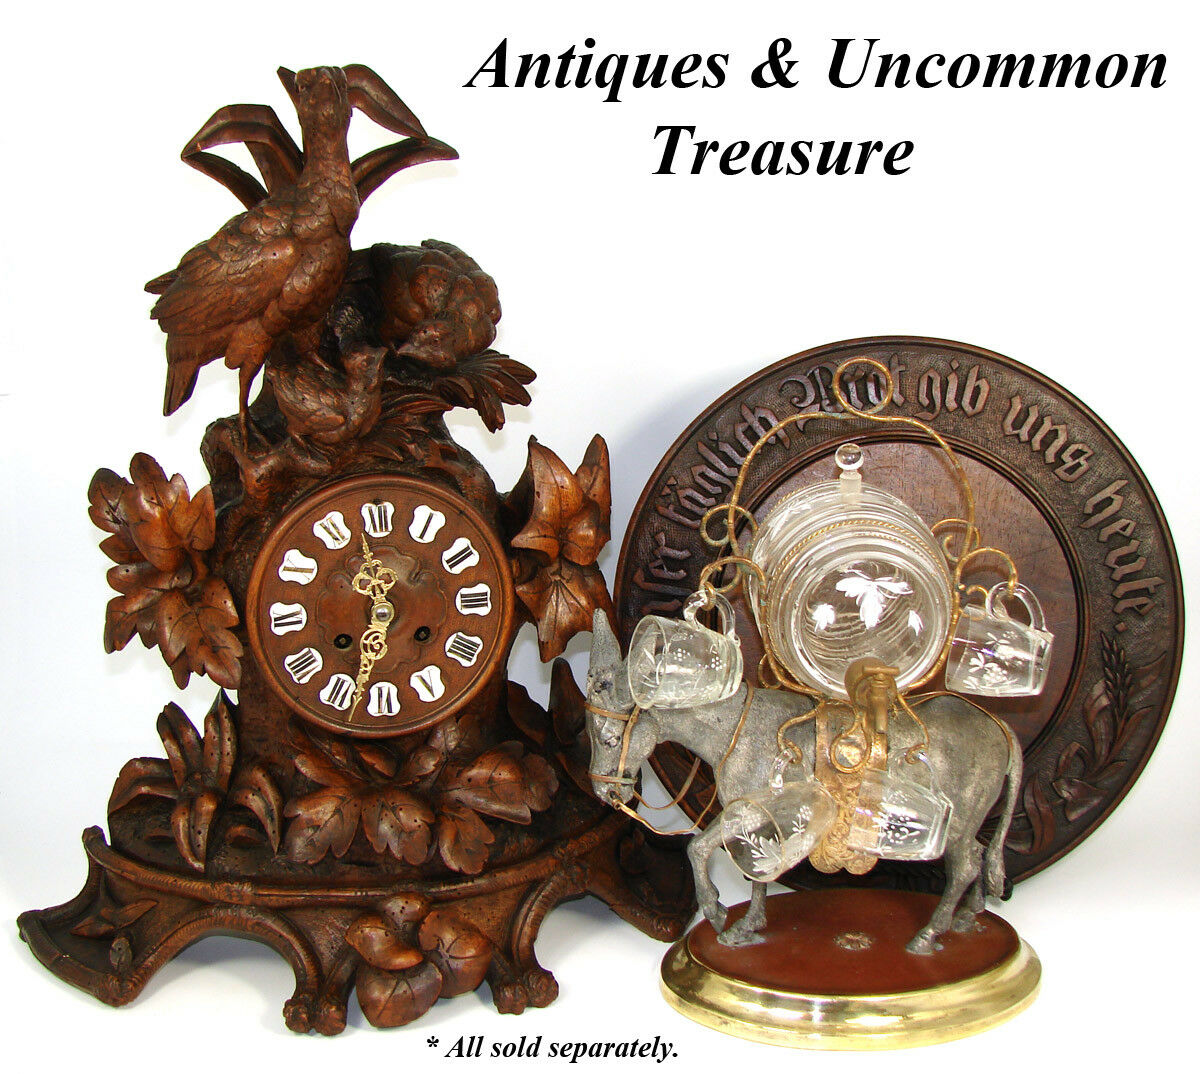 Large Antique Black Forest Carved 17" Mantel Clock, Three Game Birds & Foliage